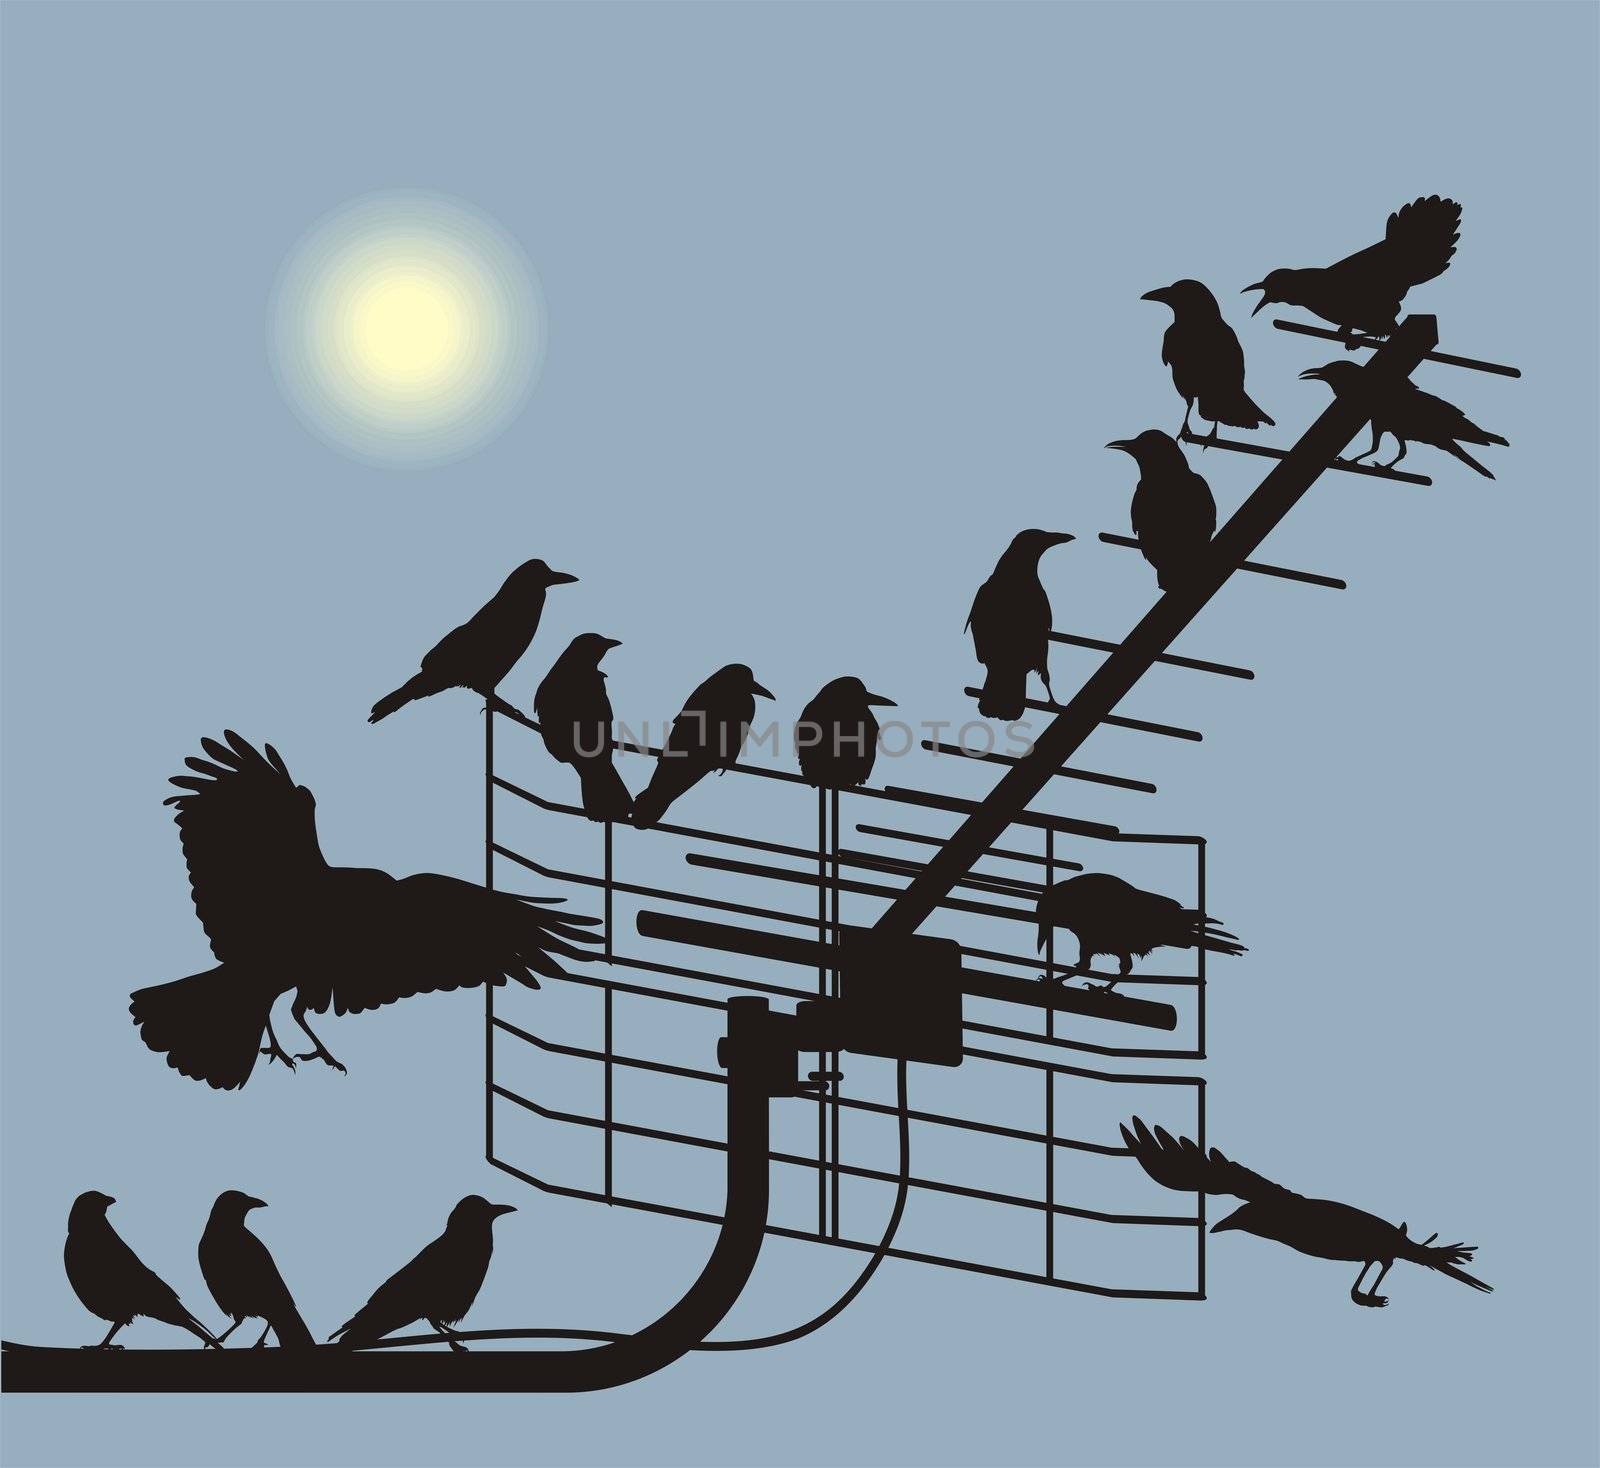 black silhouettes of the crows on the television antenna